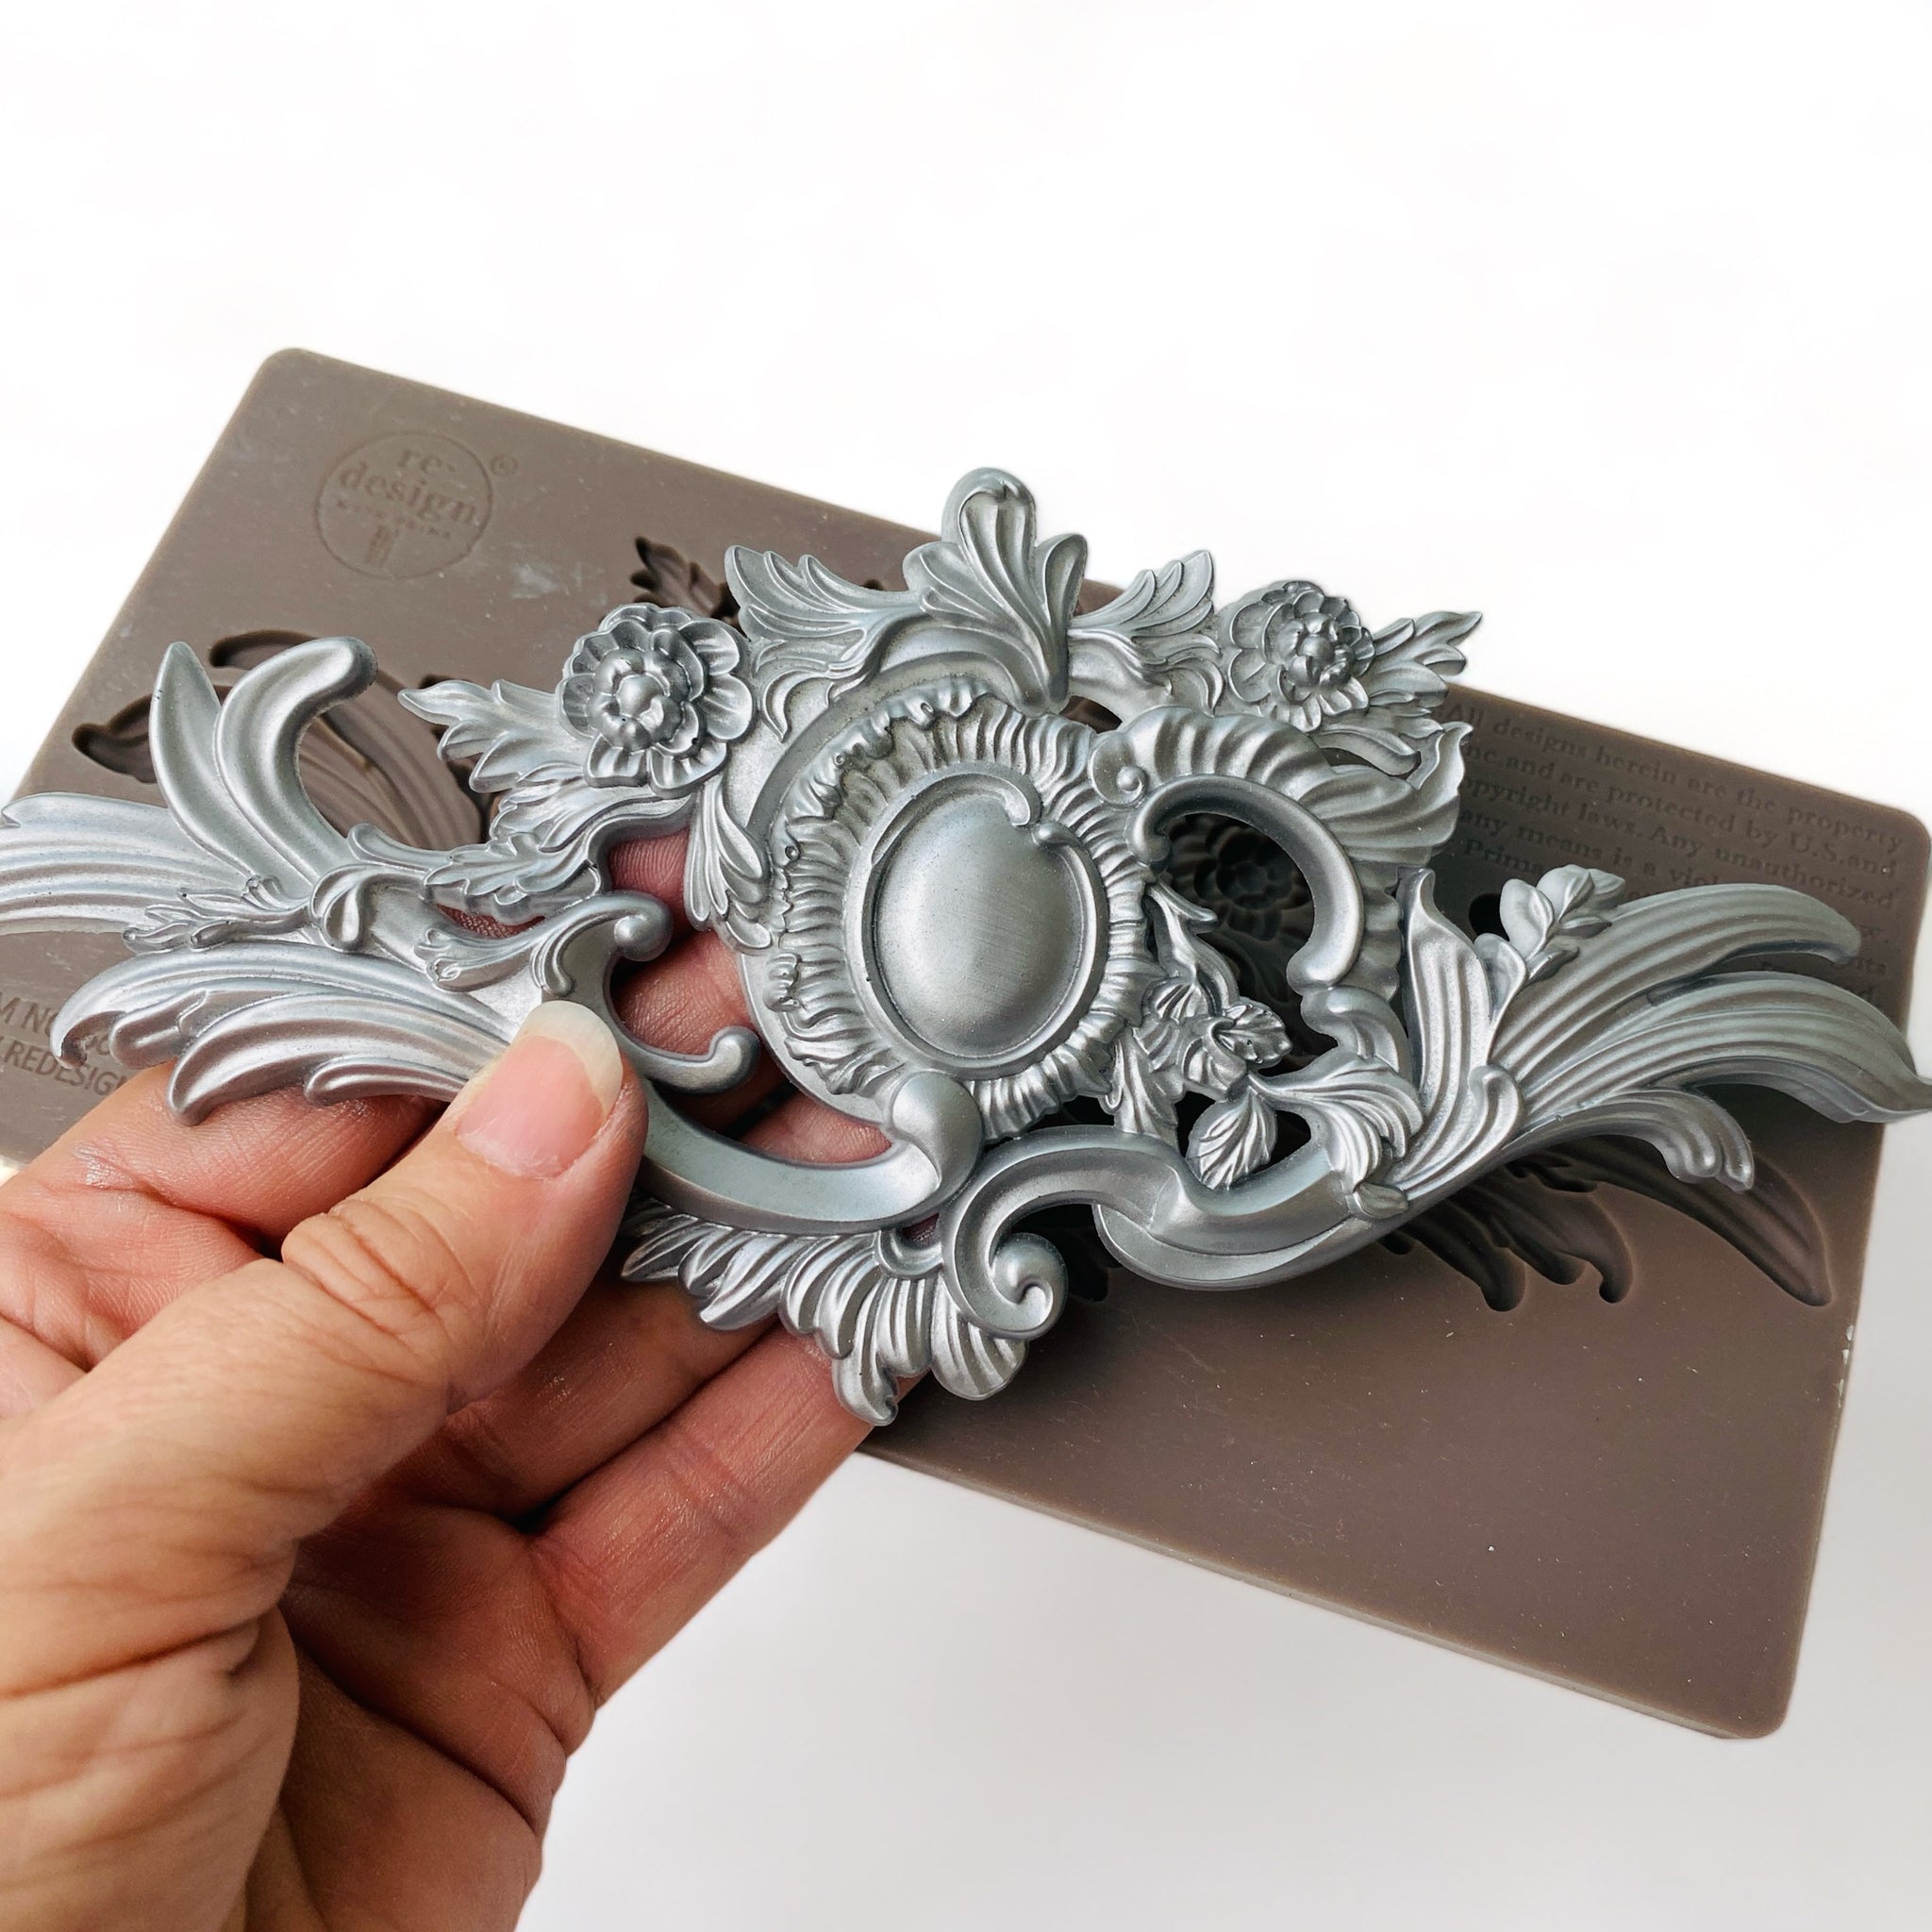 A brown silicone mold and a hand holding a silver colored casting that features a unique ornate flourish and central medallion are against a white background.